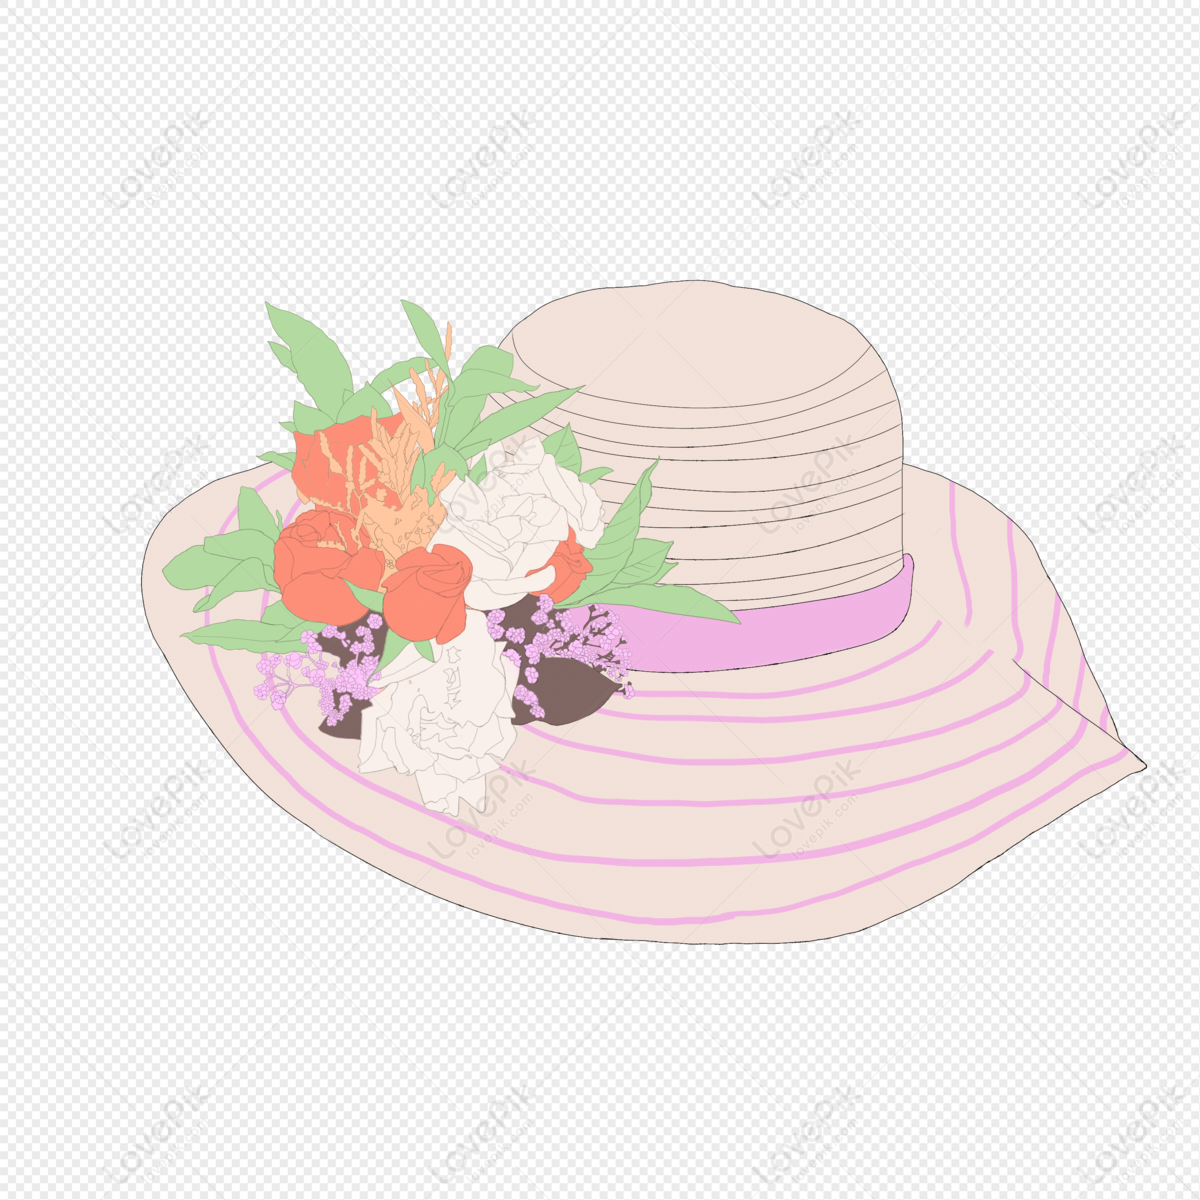 Small Fresh Hat PNG Transparent Image And Clipart Image For Free ...